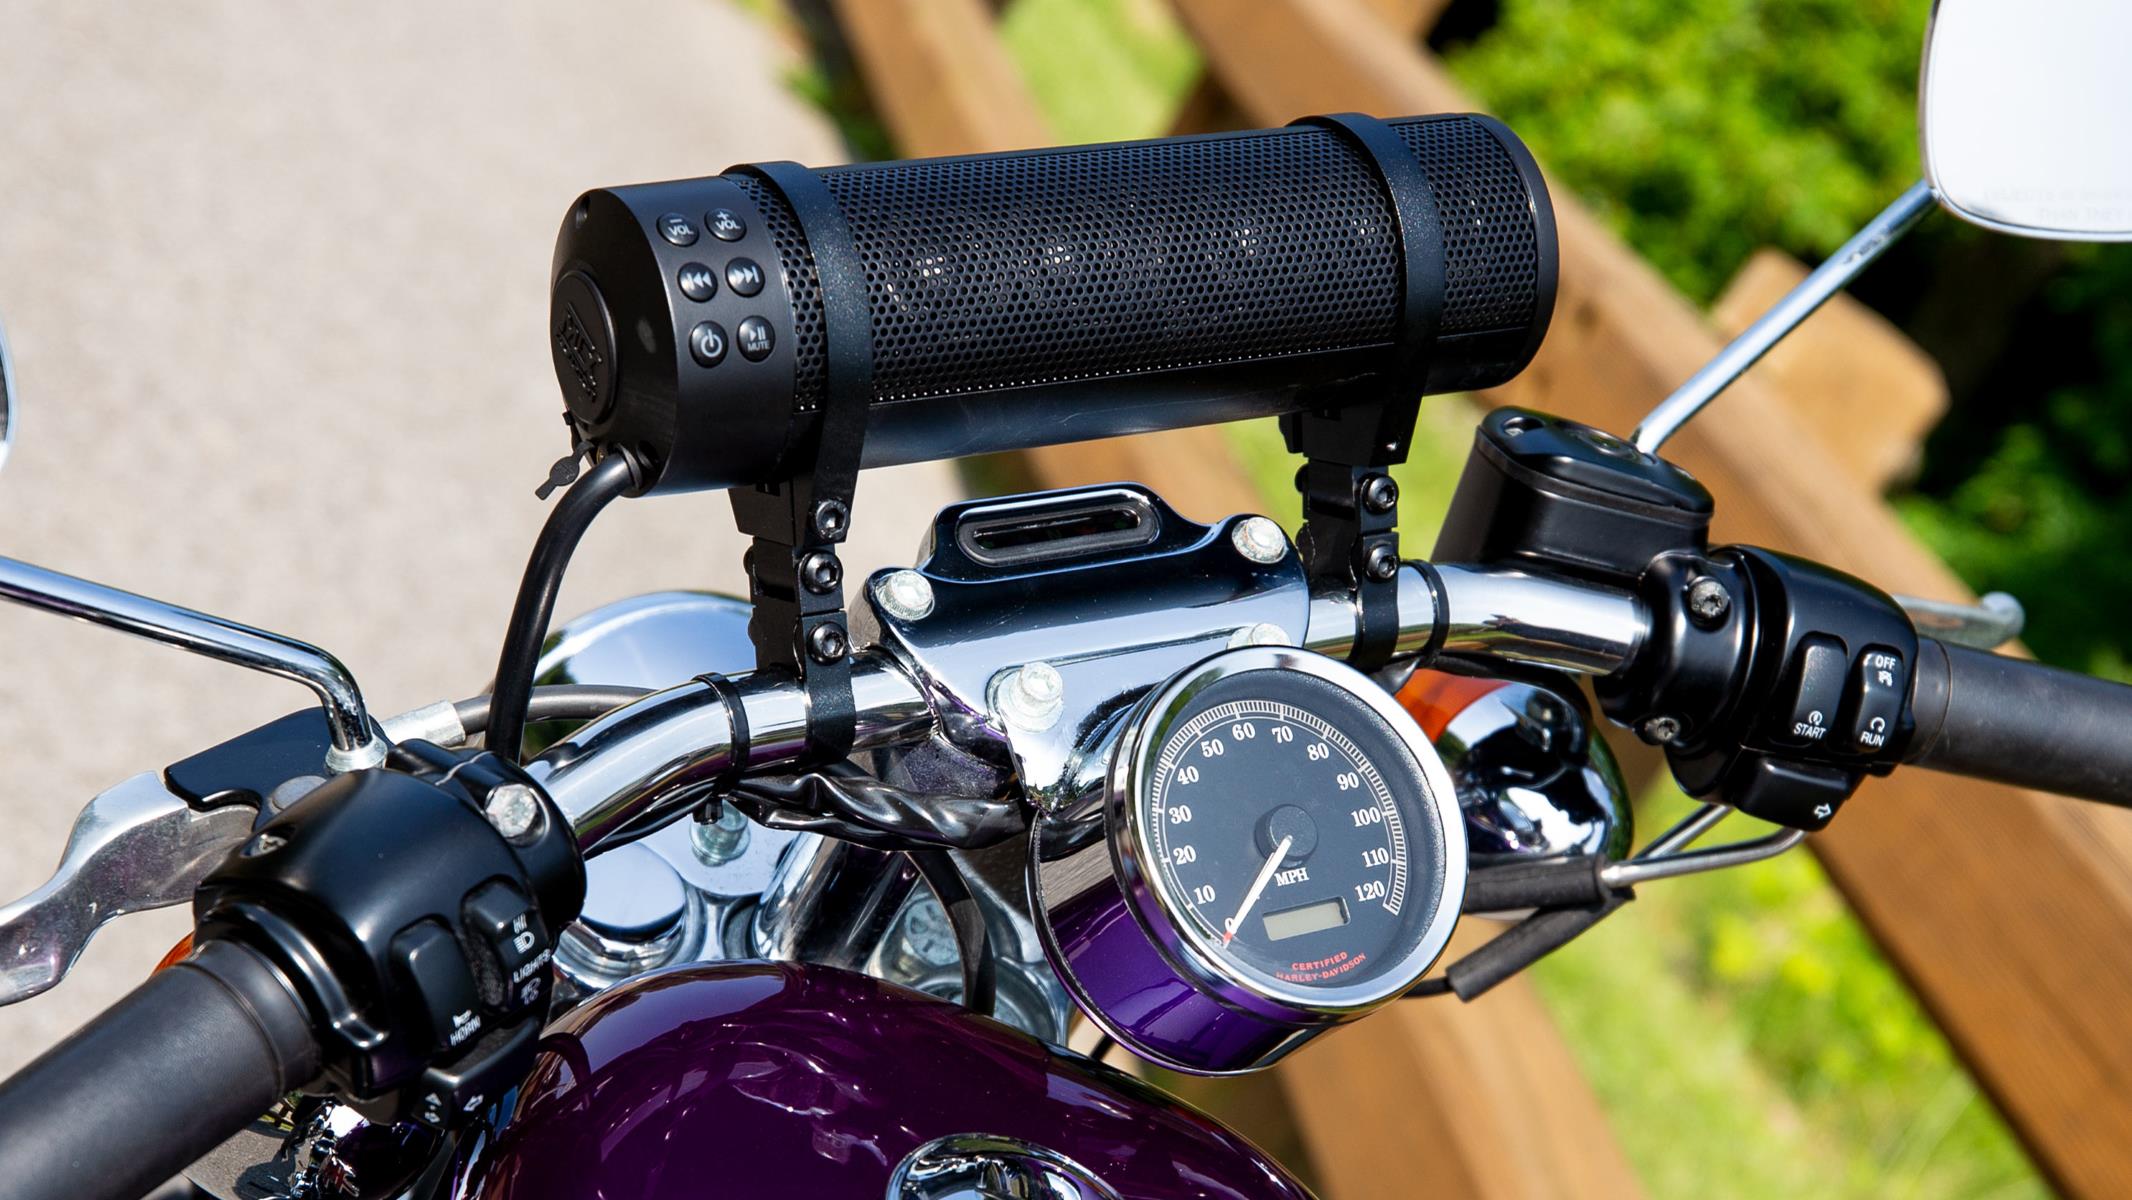 Upgrade Your Ride: Install Bluetooth Speakers On Your Motorcycle